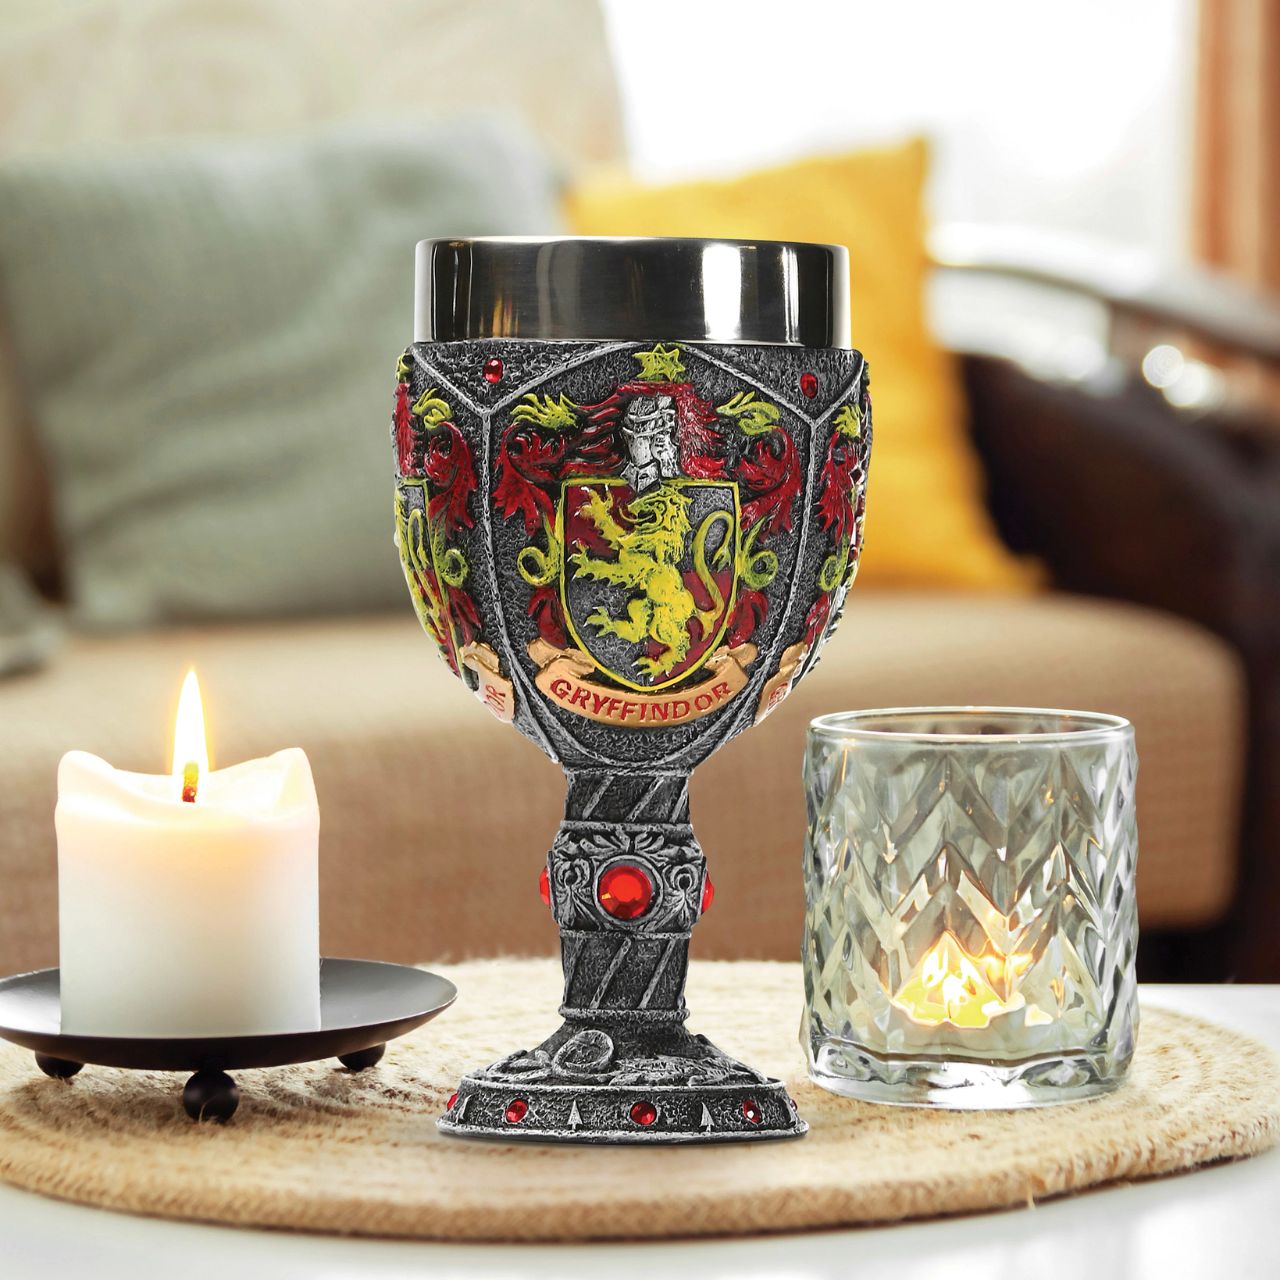 Harry Potter Gryffindor Decorative Goblet  So the sorting hat has placed you in the Gryffindor house. With a lion as its crest and Professor McGonagall at its head, Gryffindor is the house which most values the virtues of courage, bravery and determination.